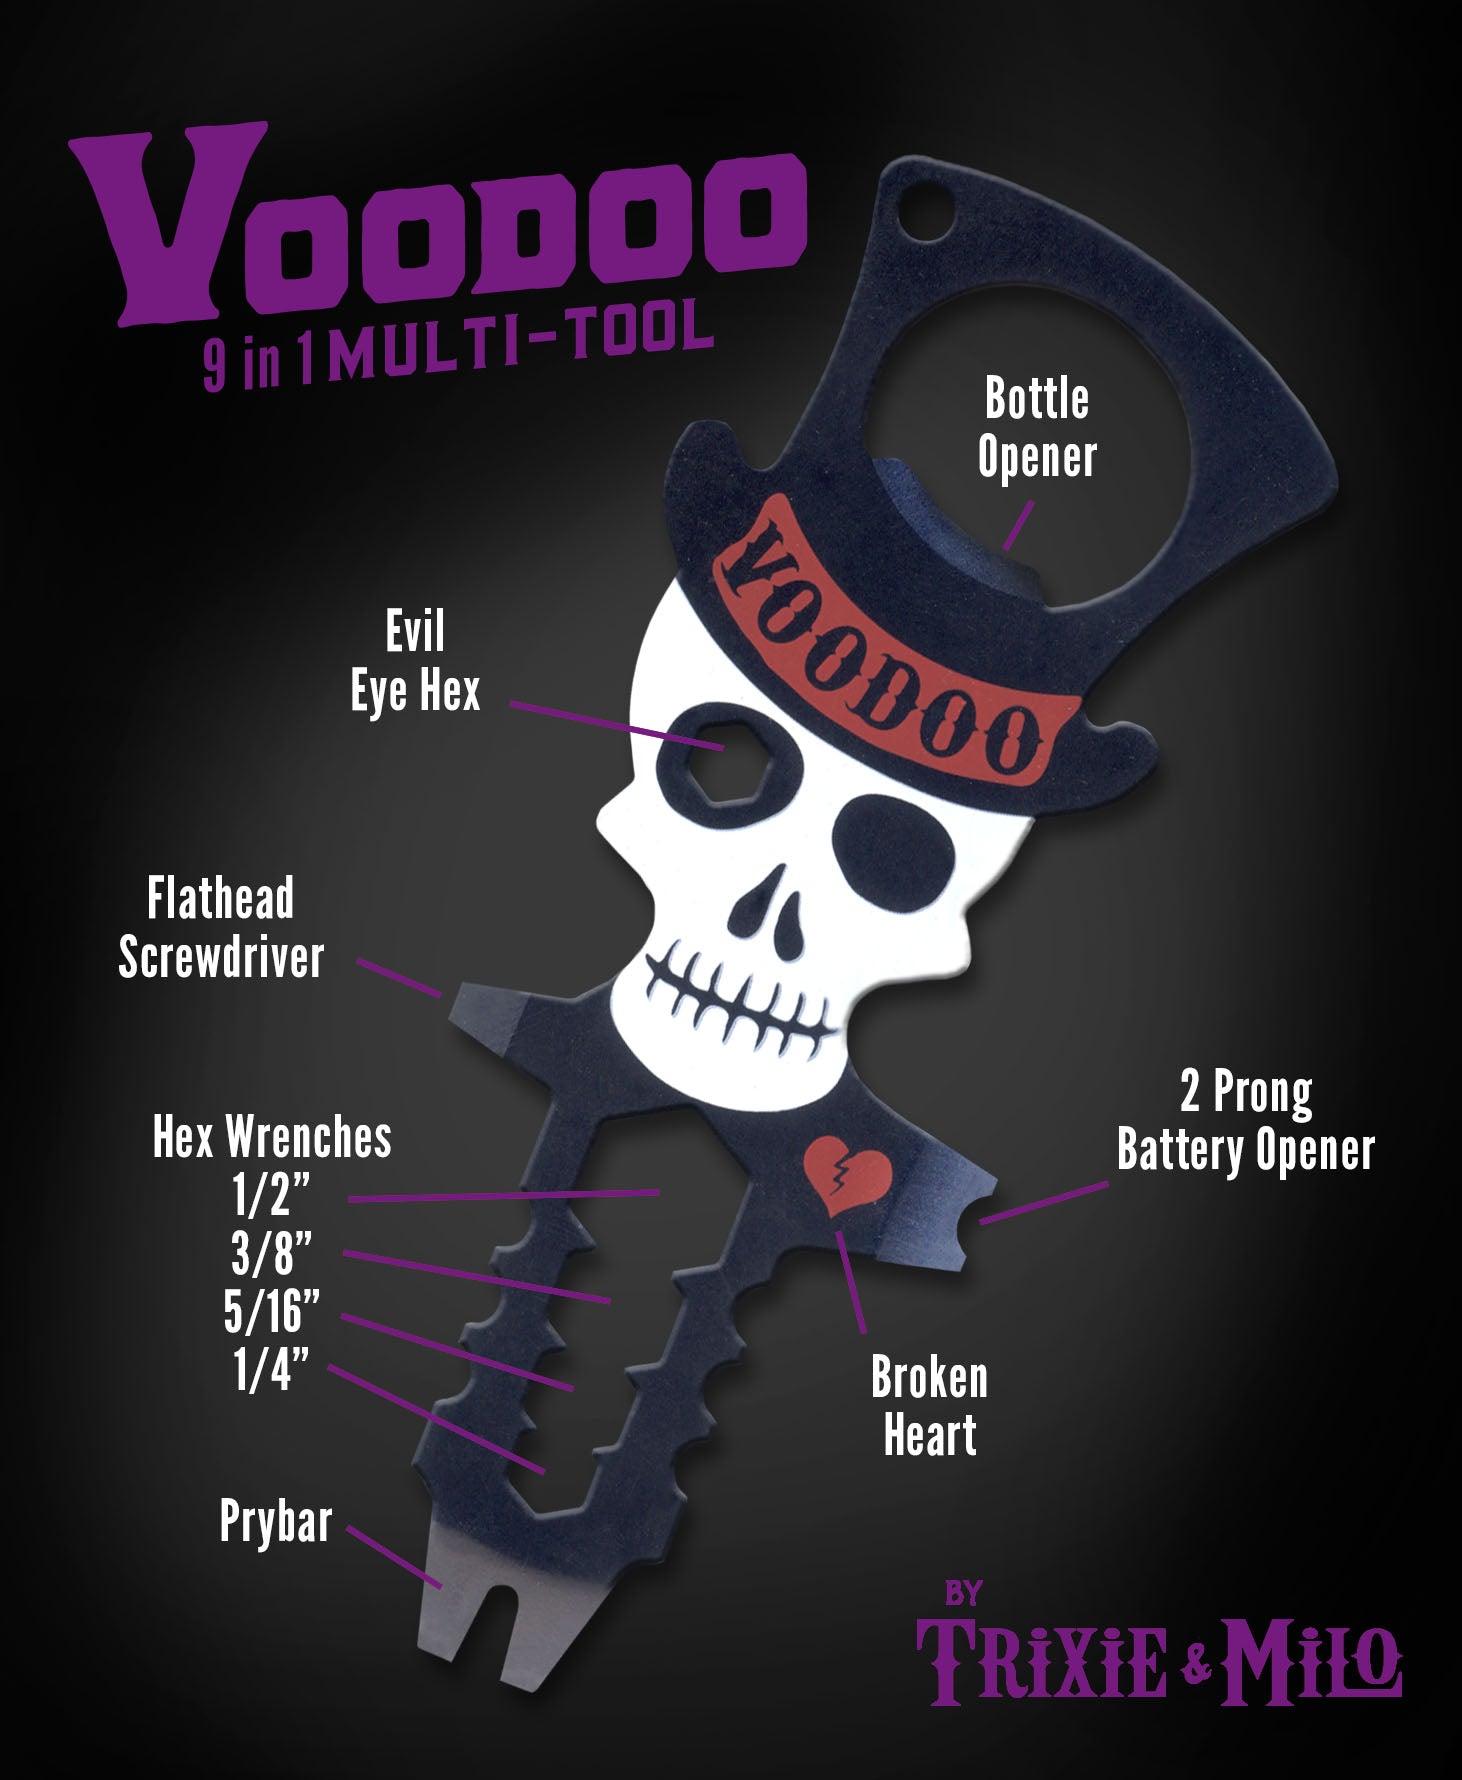 The Voodoo Doll Multifunction Pocket Tool Portable and pocket sized preparedness. Great as everyday carry for DIY projects, camping, backpacking, glamping or hiking! 